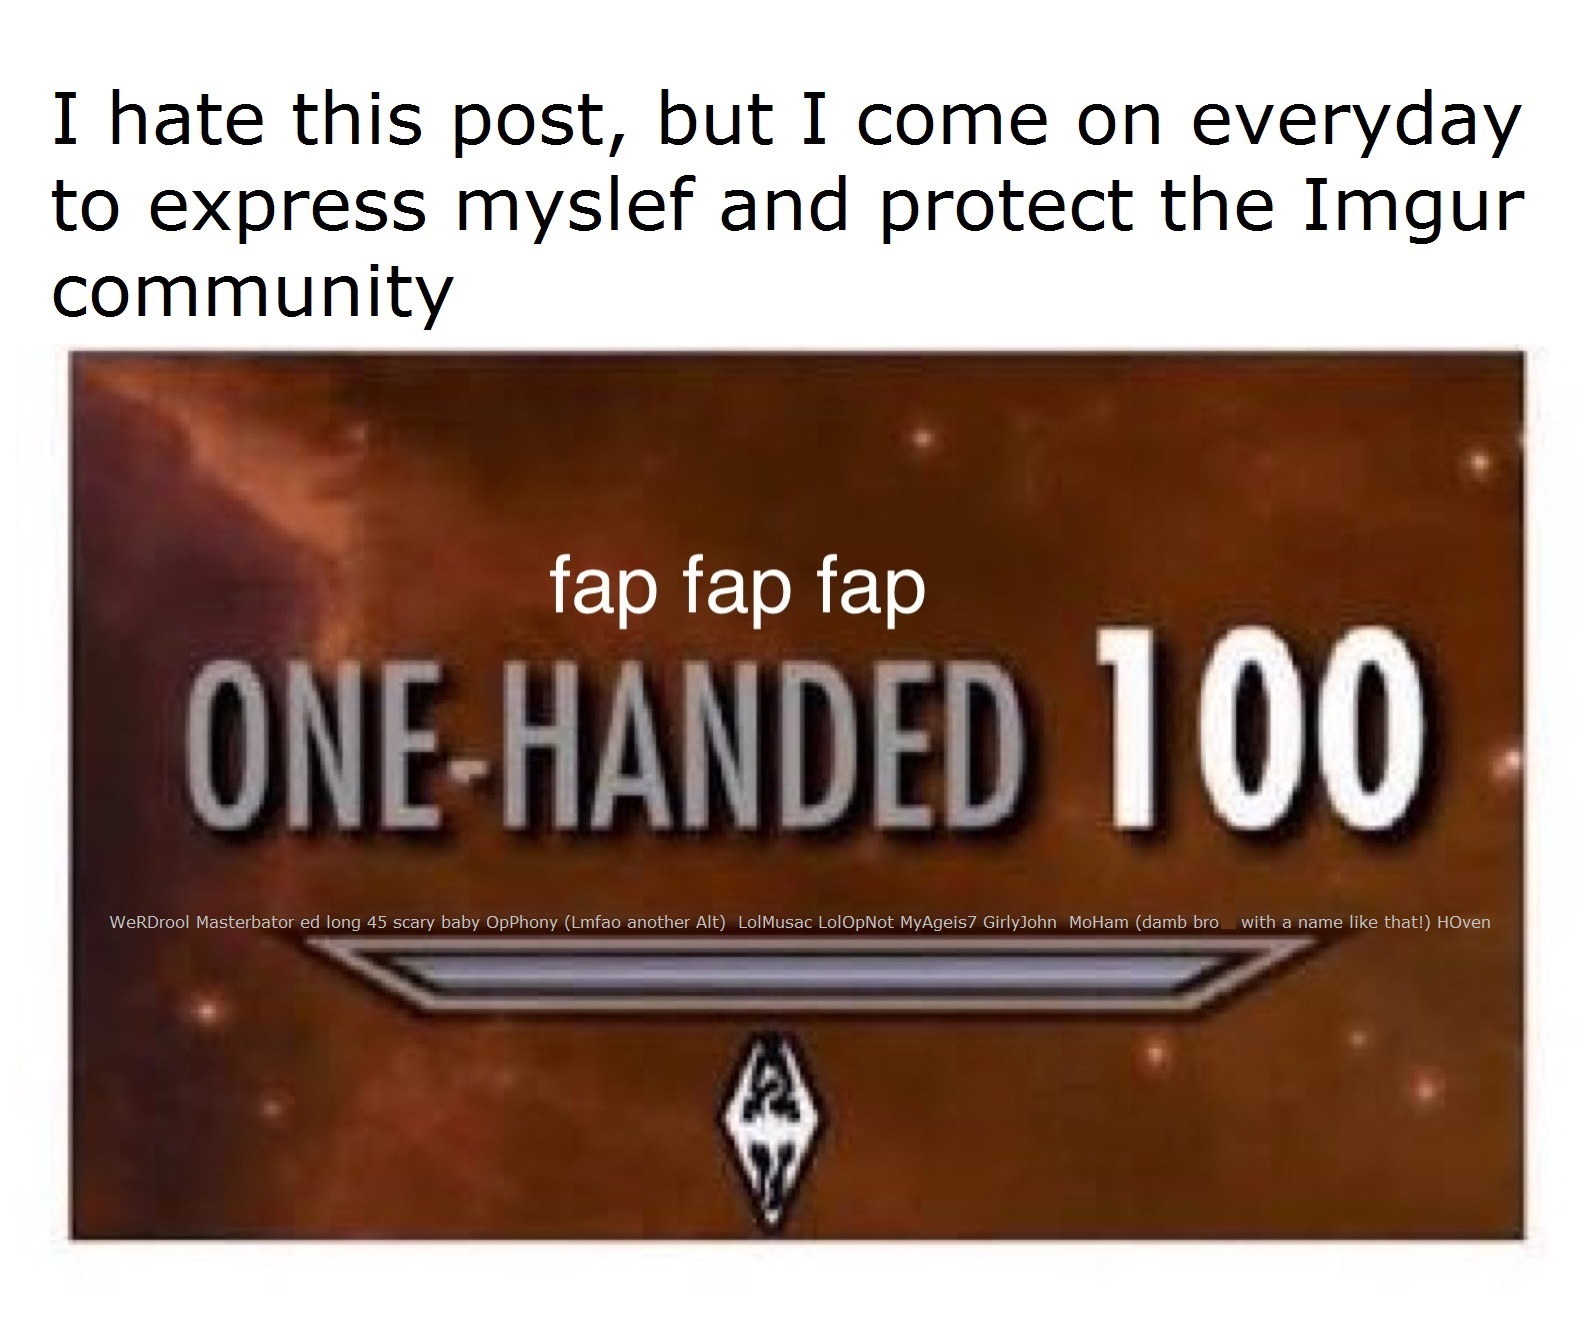 material - I hate this post, but I come on everyday to express myslef and protect the Imgur community fap fap fap OneHanded 100 WERDrool Masterbator ed long 45 scary baby OpPhony Lmfao another Alt LolMusac LolOpNot MyAgeis 7 GirlyJohn Moham damb bro with 